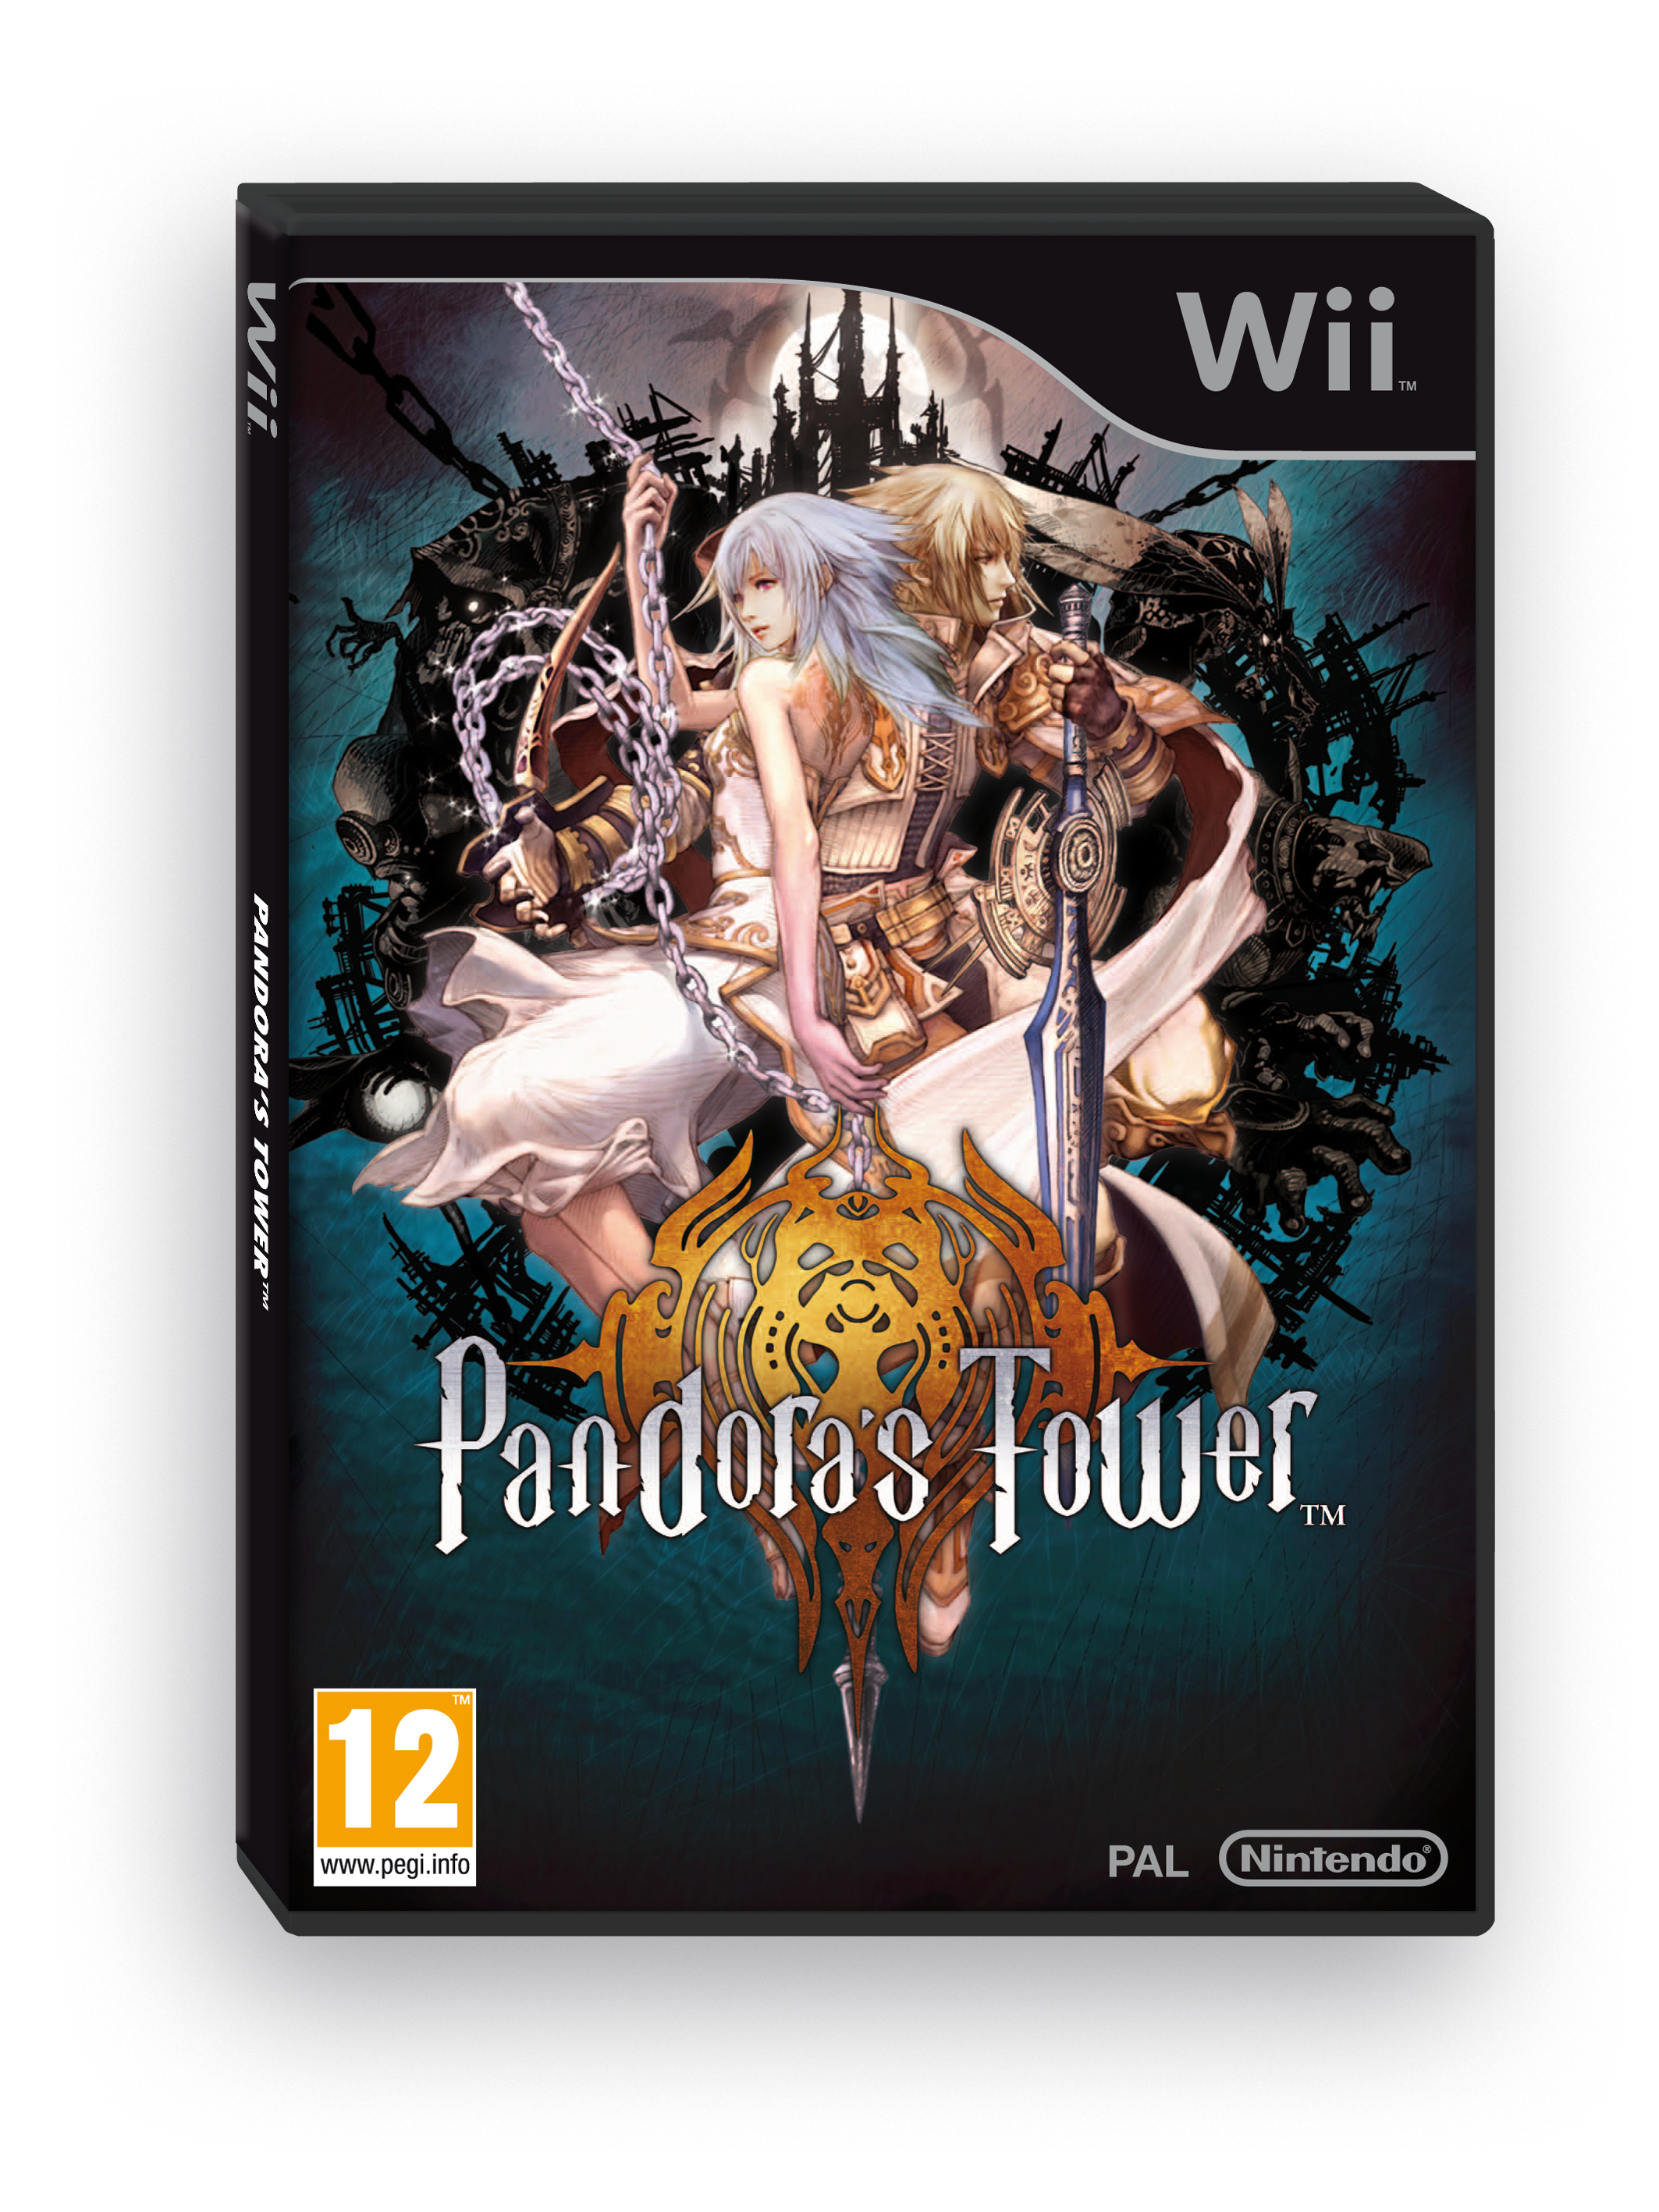 Pandora's Tower For Wii Is Finally Coming To America - My Nintendo News